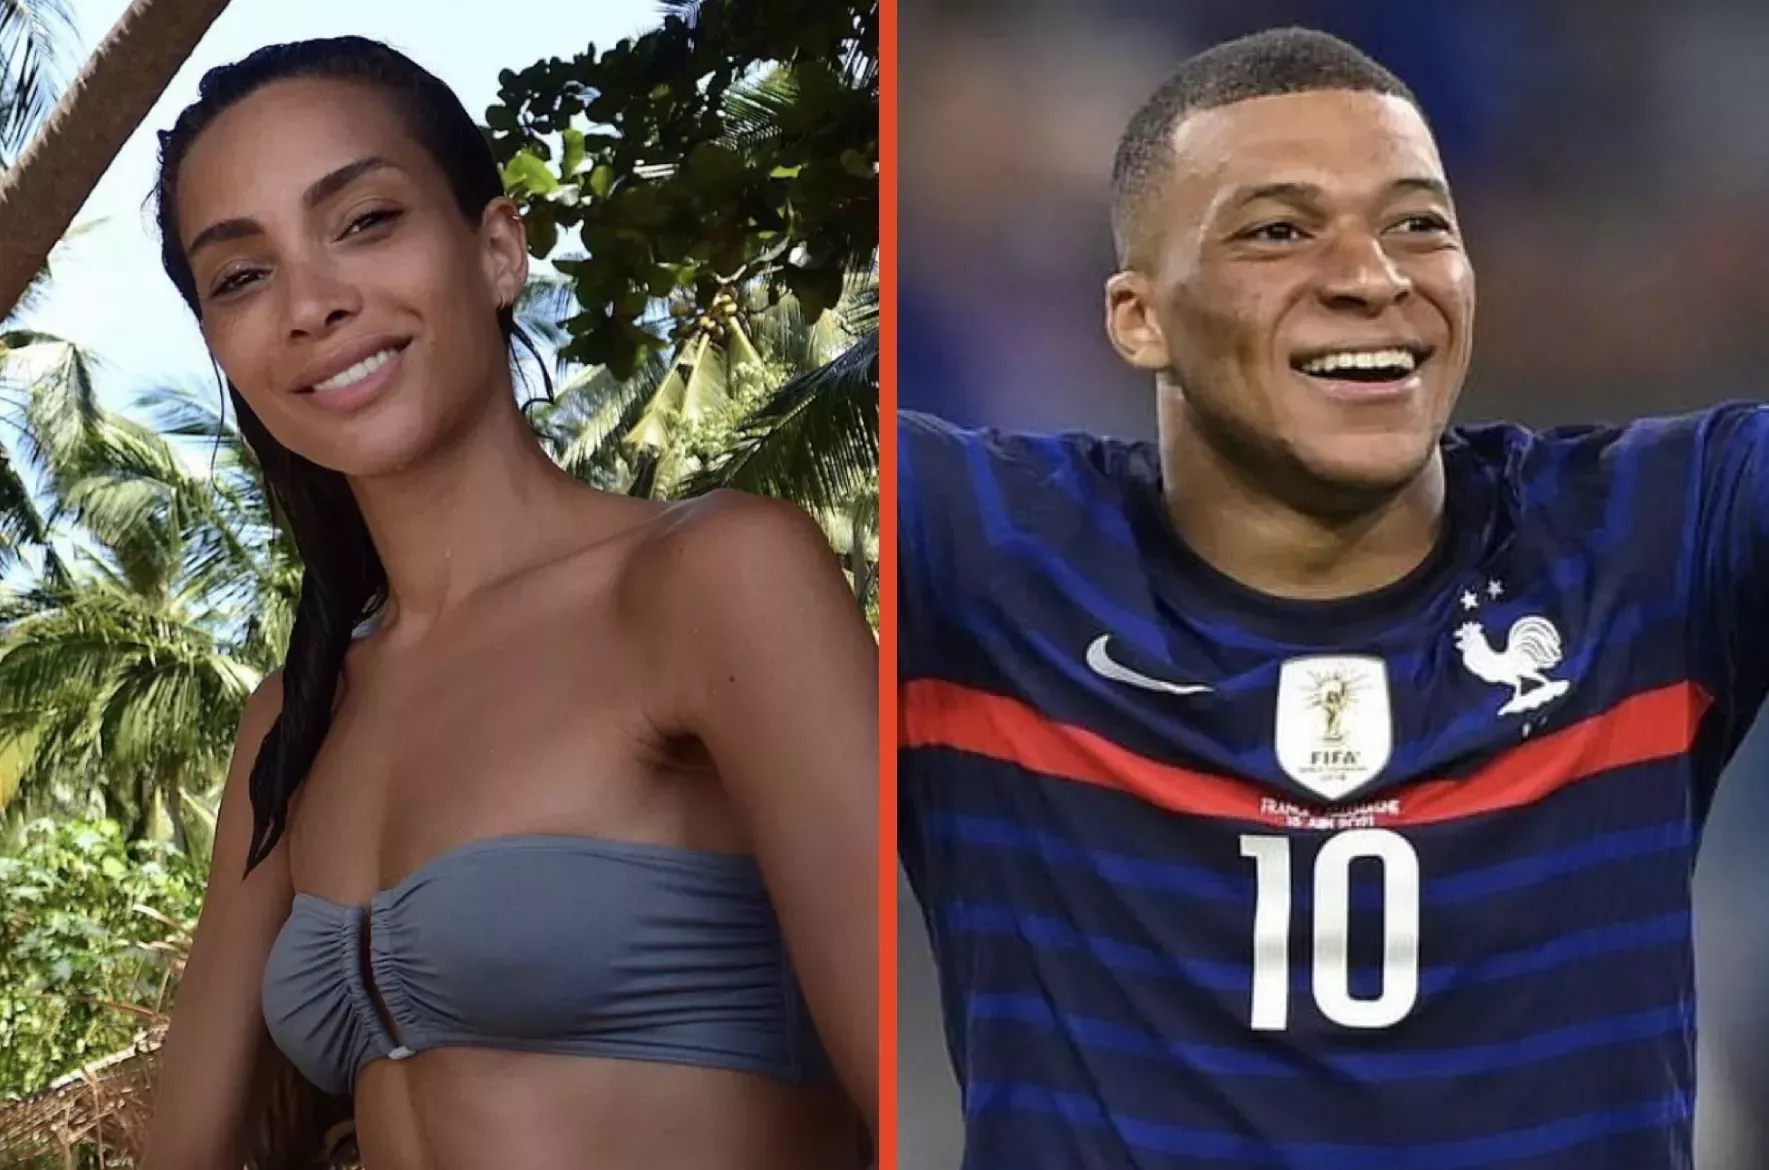 Photos of model Ines Rau and soccer star Kylian Mbappe side by side.